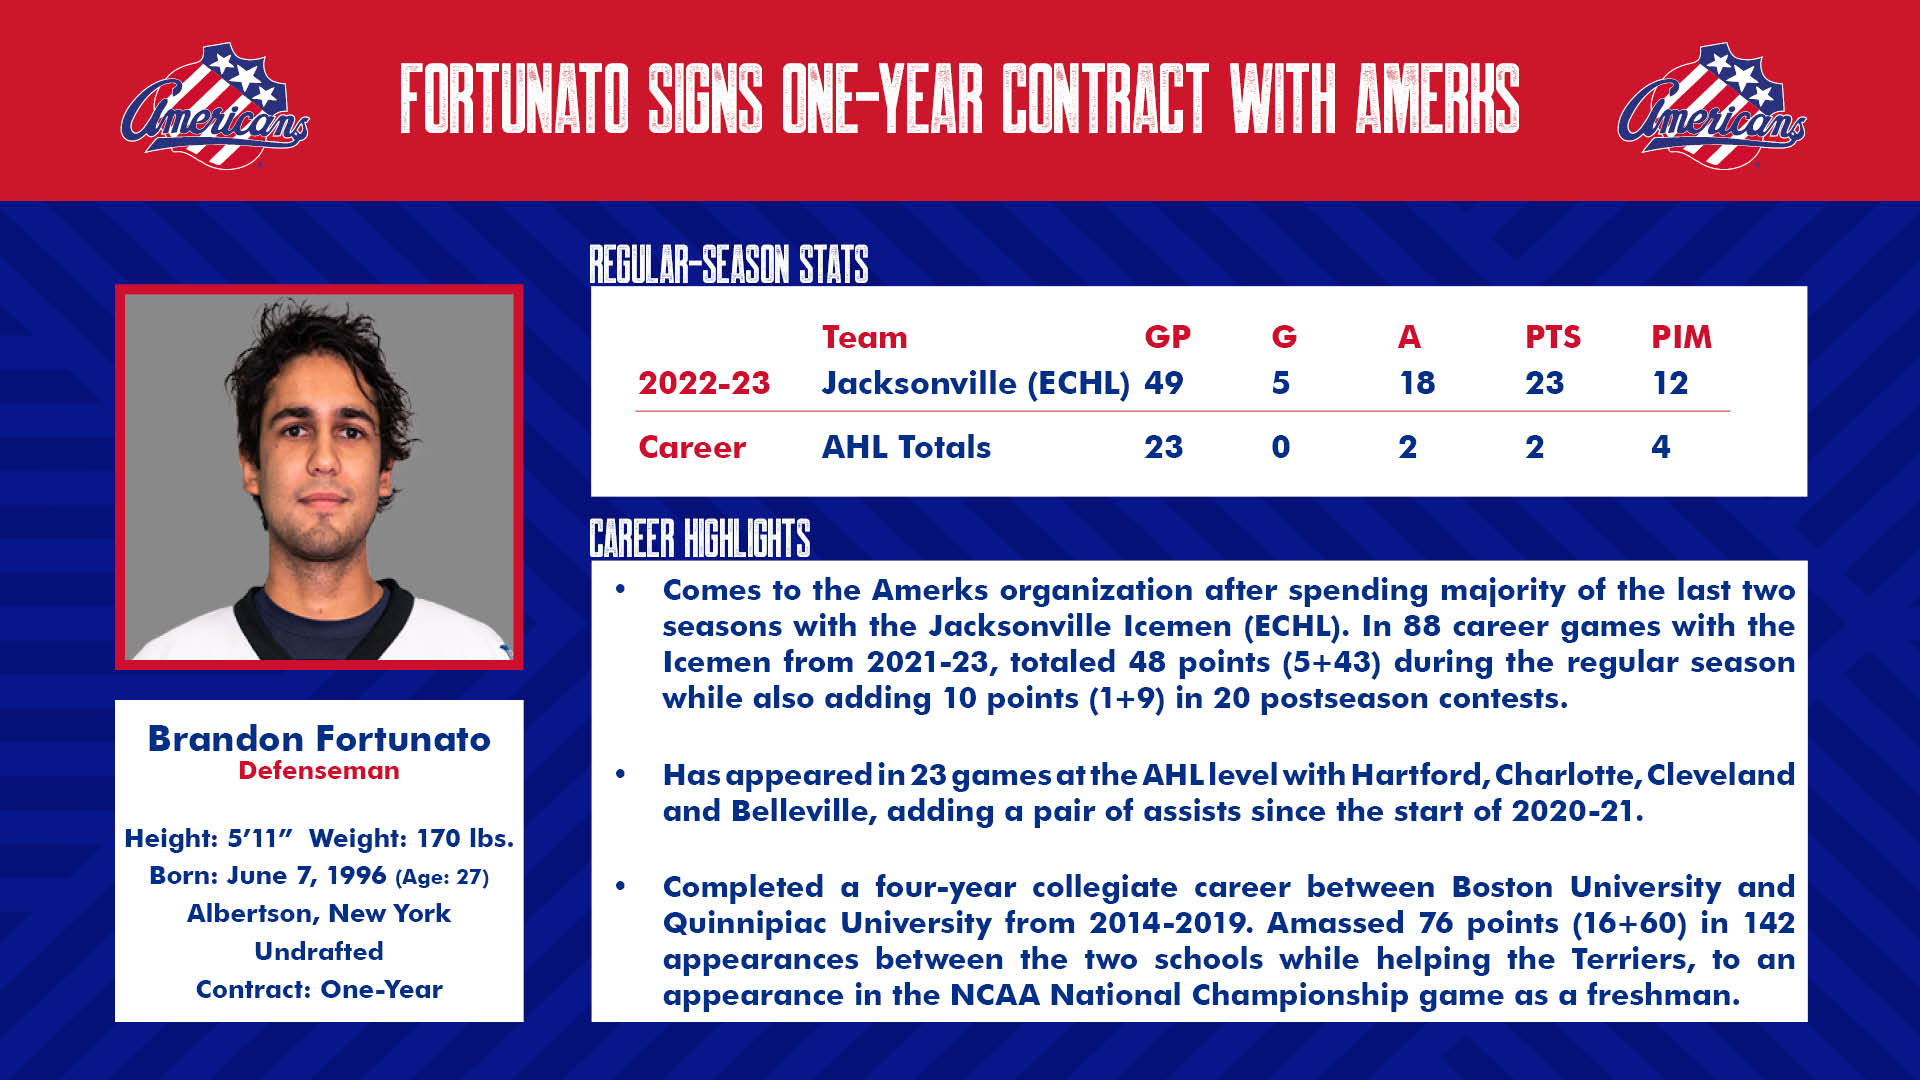 Fortunato Signs One-Year Contract.jpg